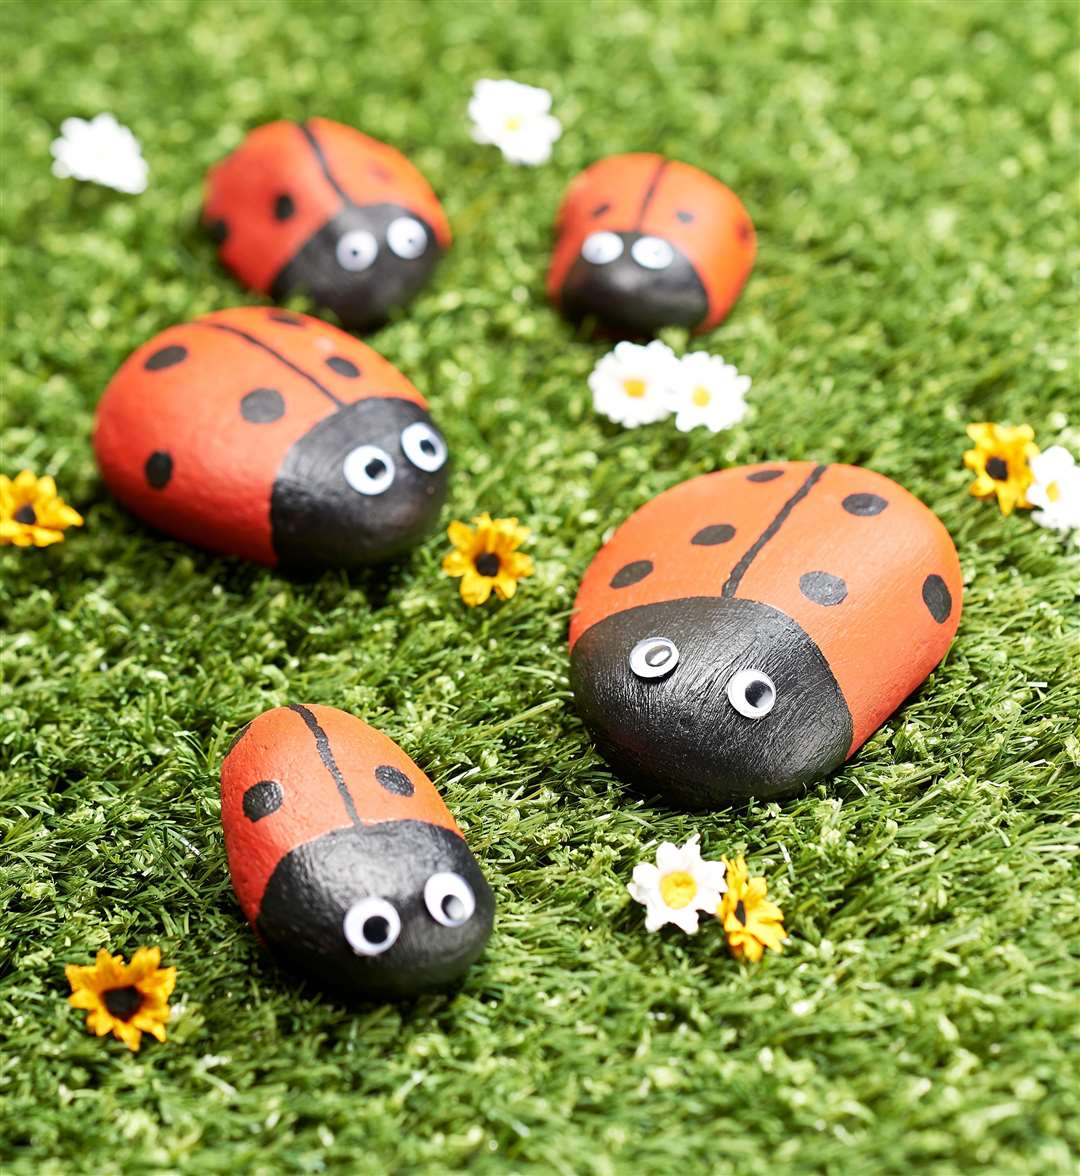 Painted stones are a popular craft in lockdown. Picture: Hobbycraft/PA